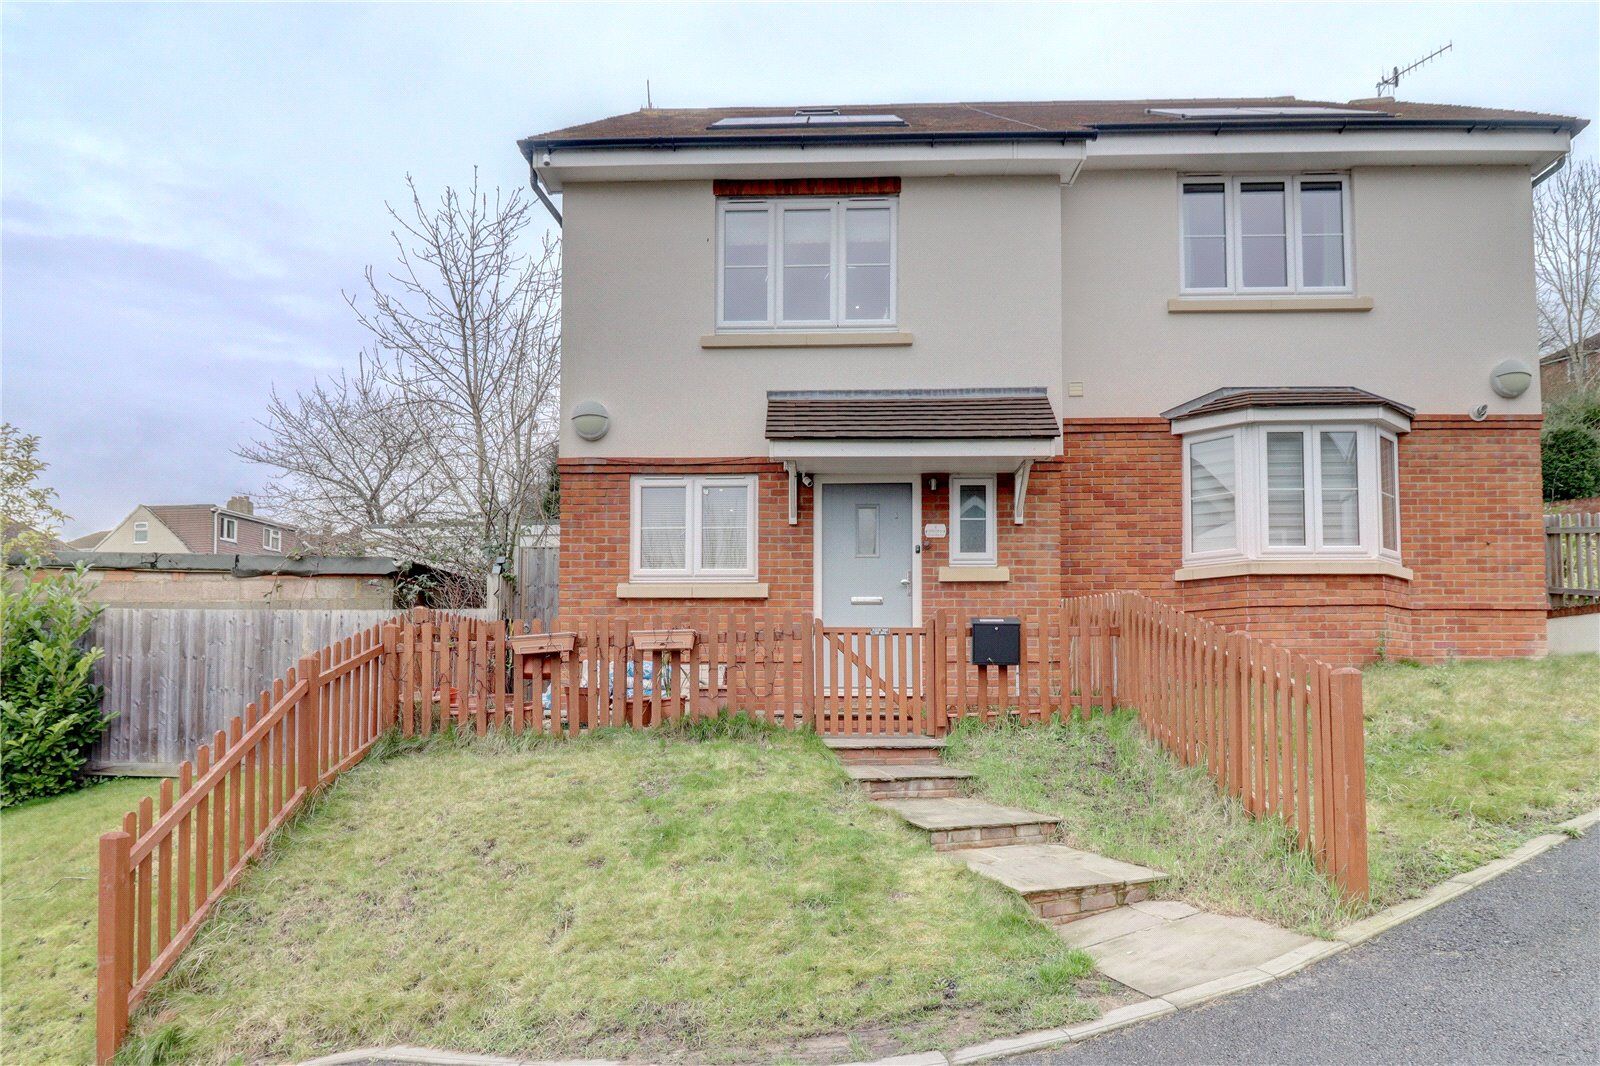 3 bedroom semi detached house for sale Hillview Gardens, High Wycombe, HP13, main image